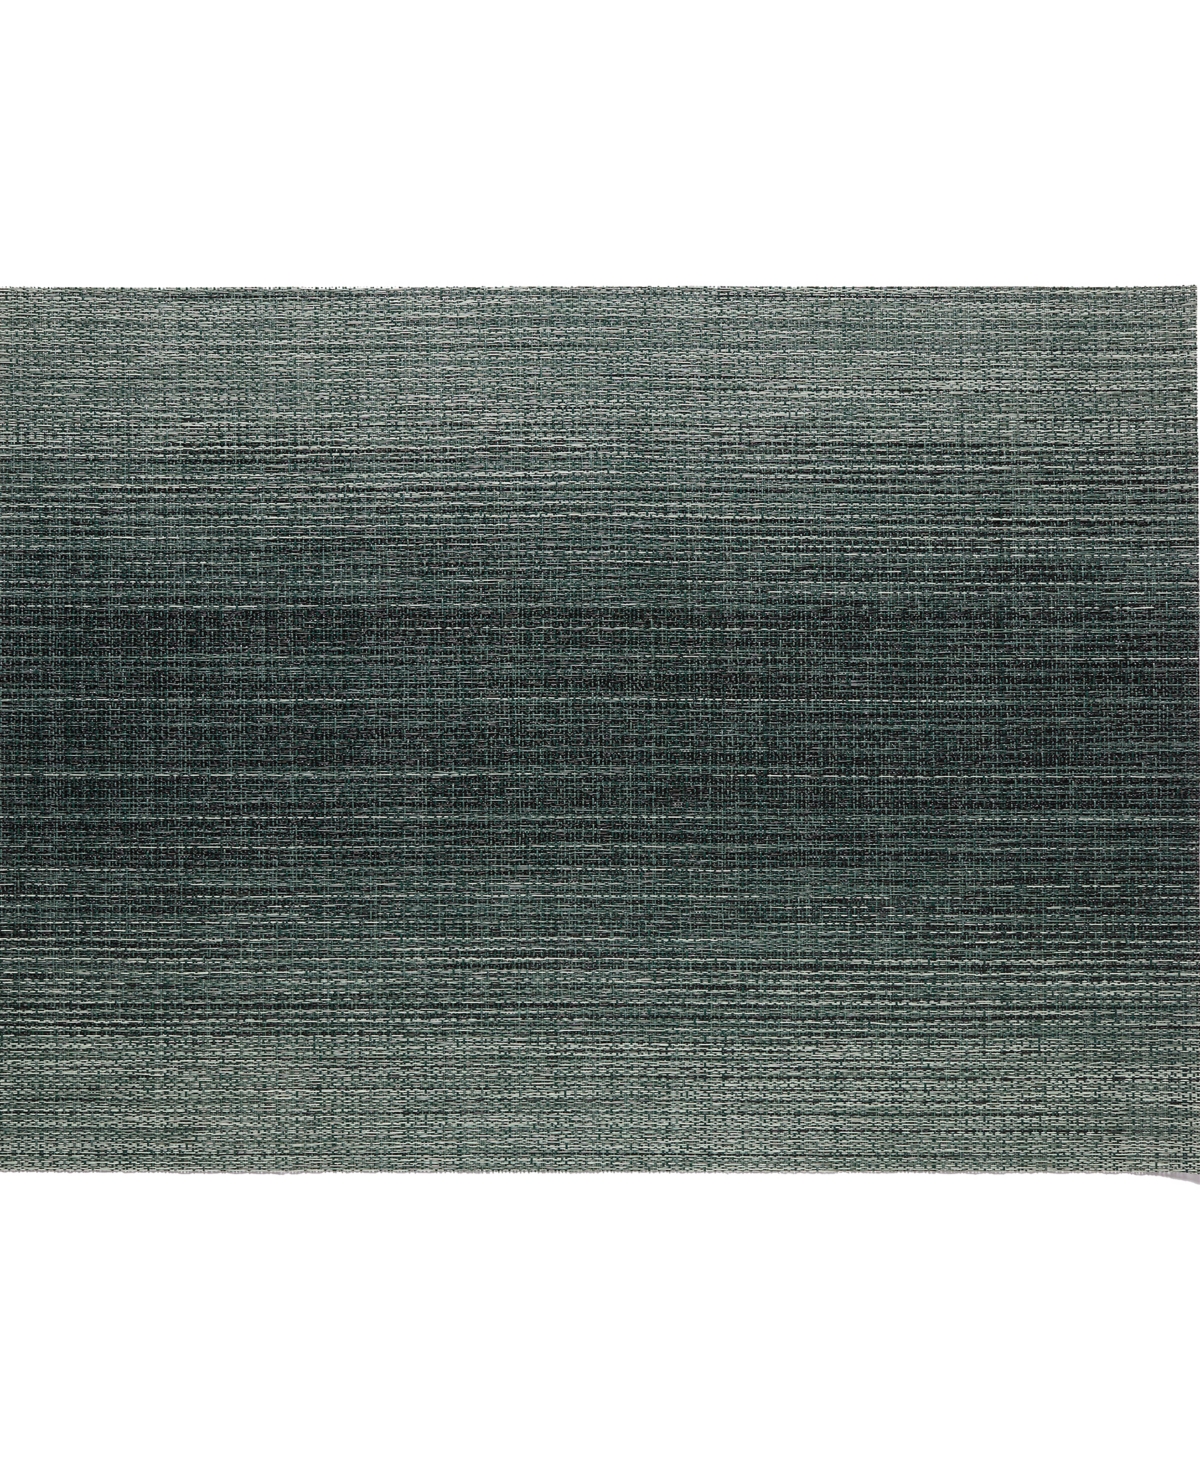 14906793 Chilewich Ombre Placemat 19L x 14W sku 14906793